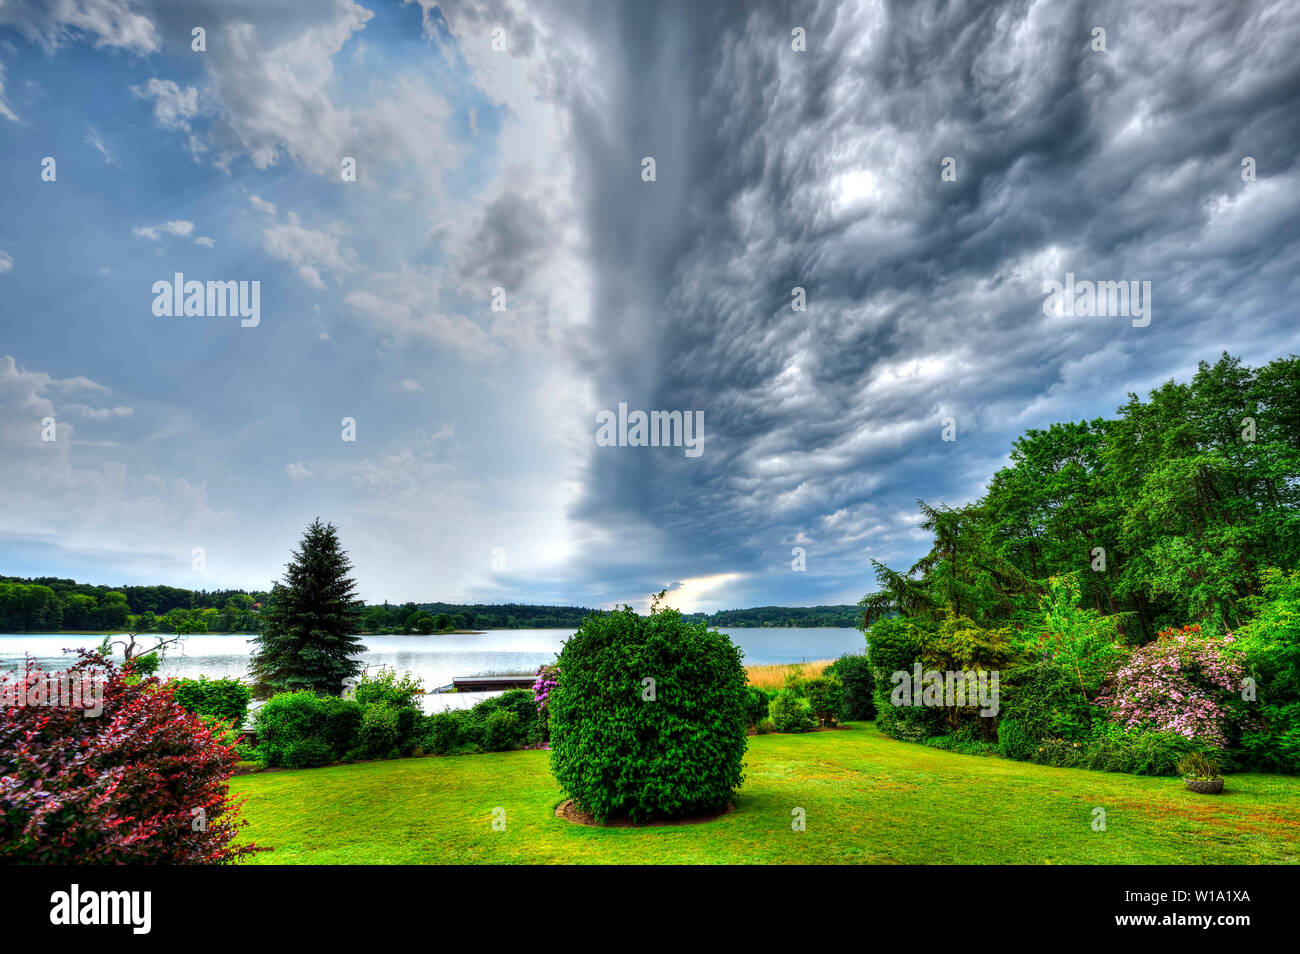 Thunderstorm in Poenitz am See, Germany, Europe Stock Photo